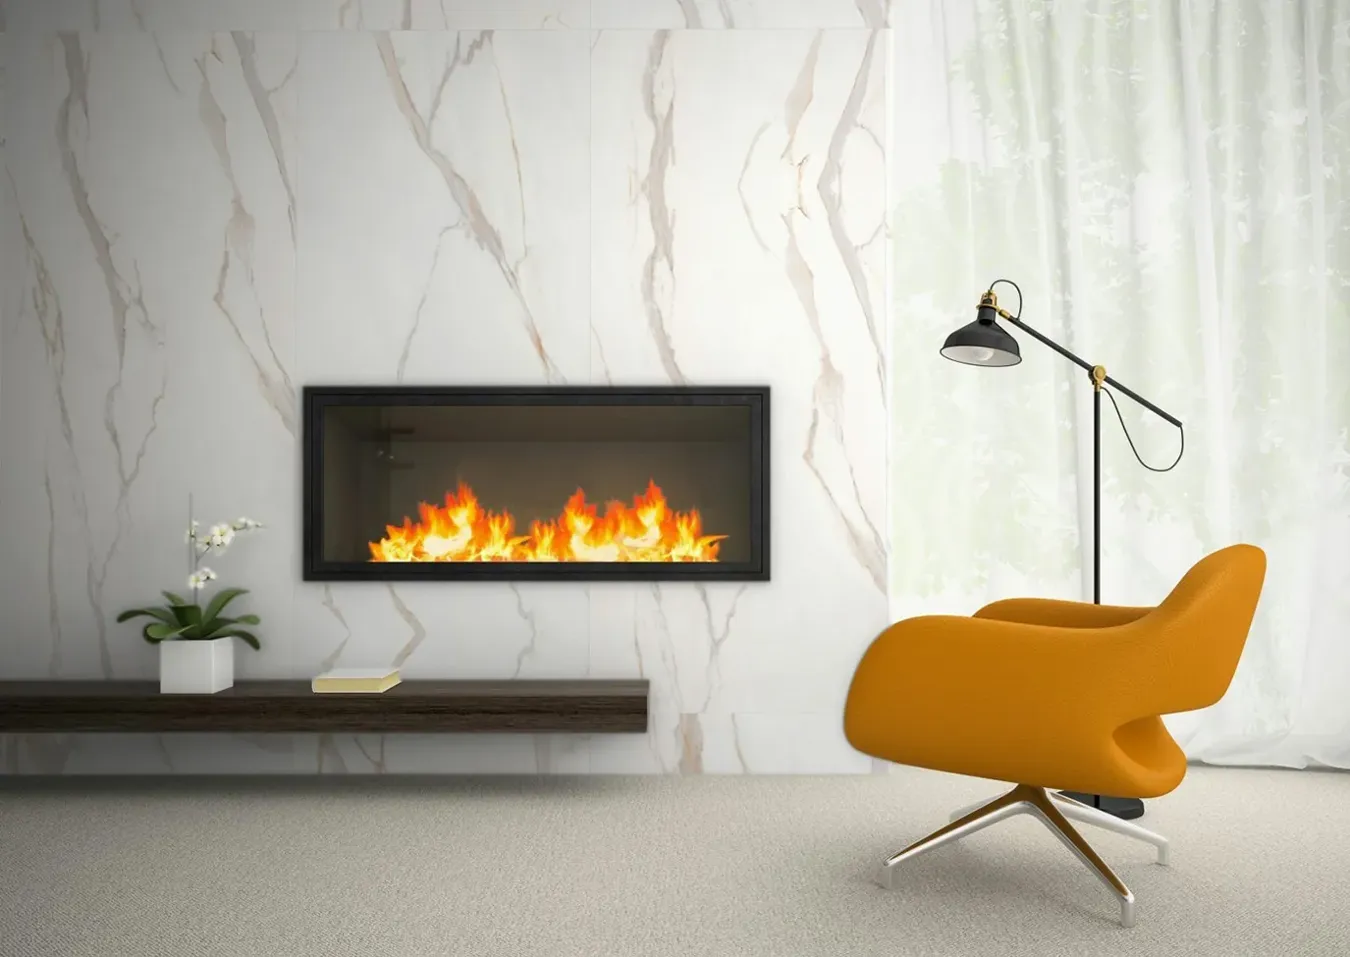 Sophisticated living room with white marble-effect tiled fireplace, yellow designer chair, and elegant floor lamp.